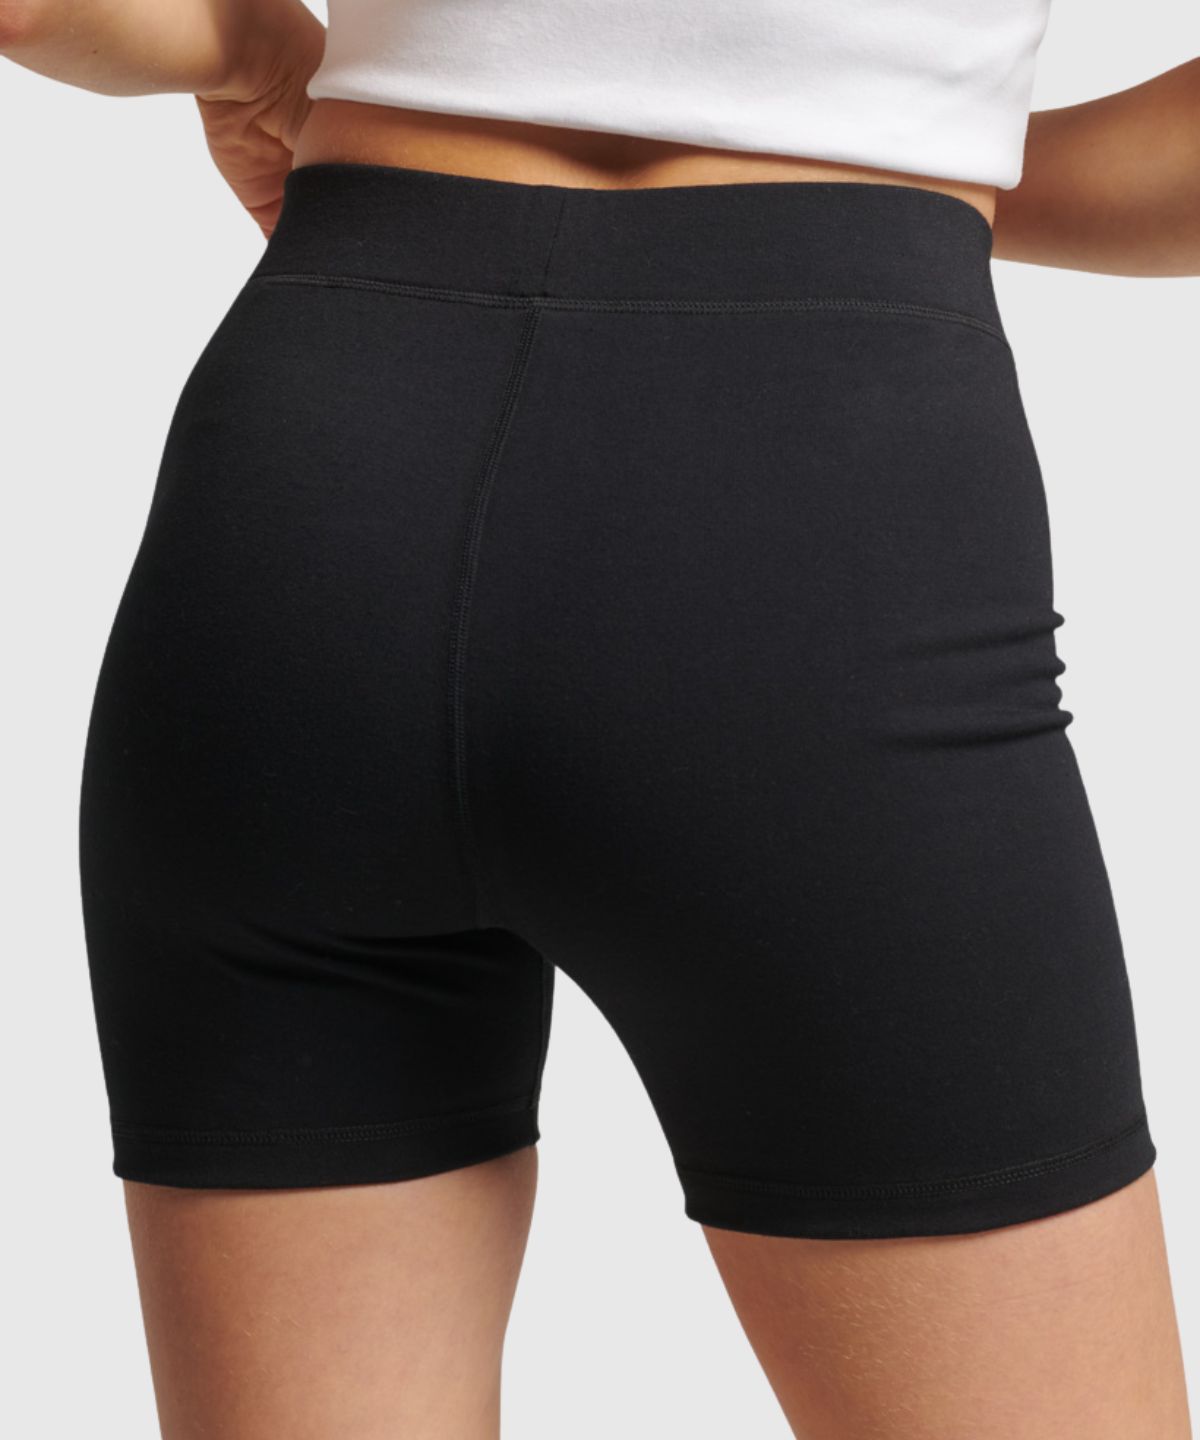 Code Core Sport Cycle Short